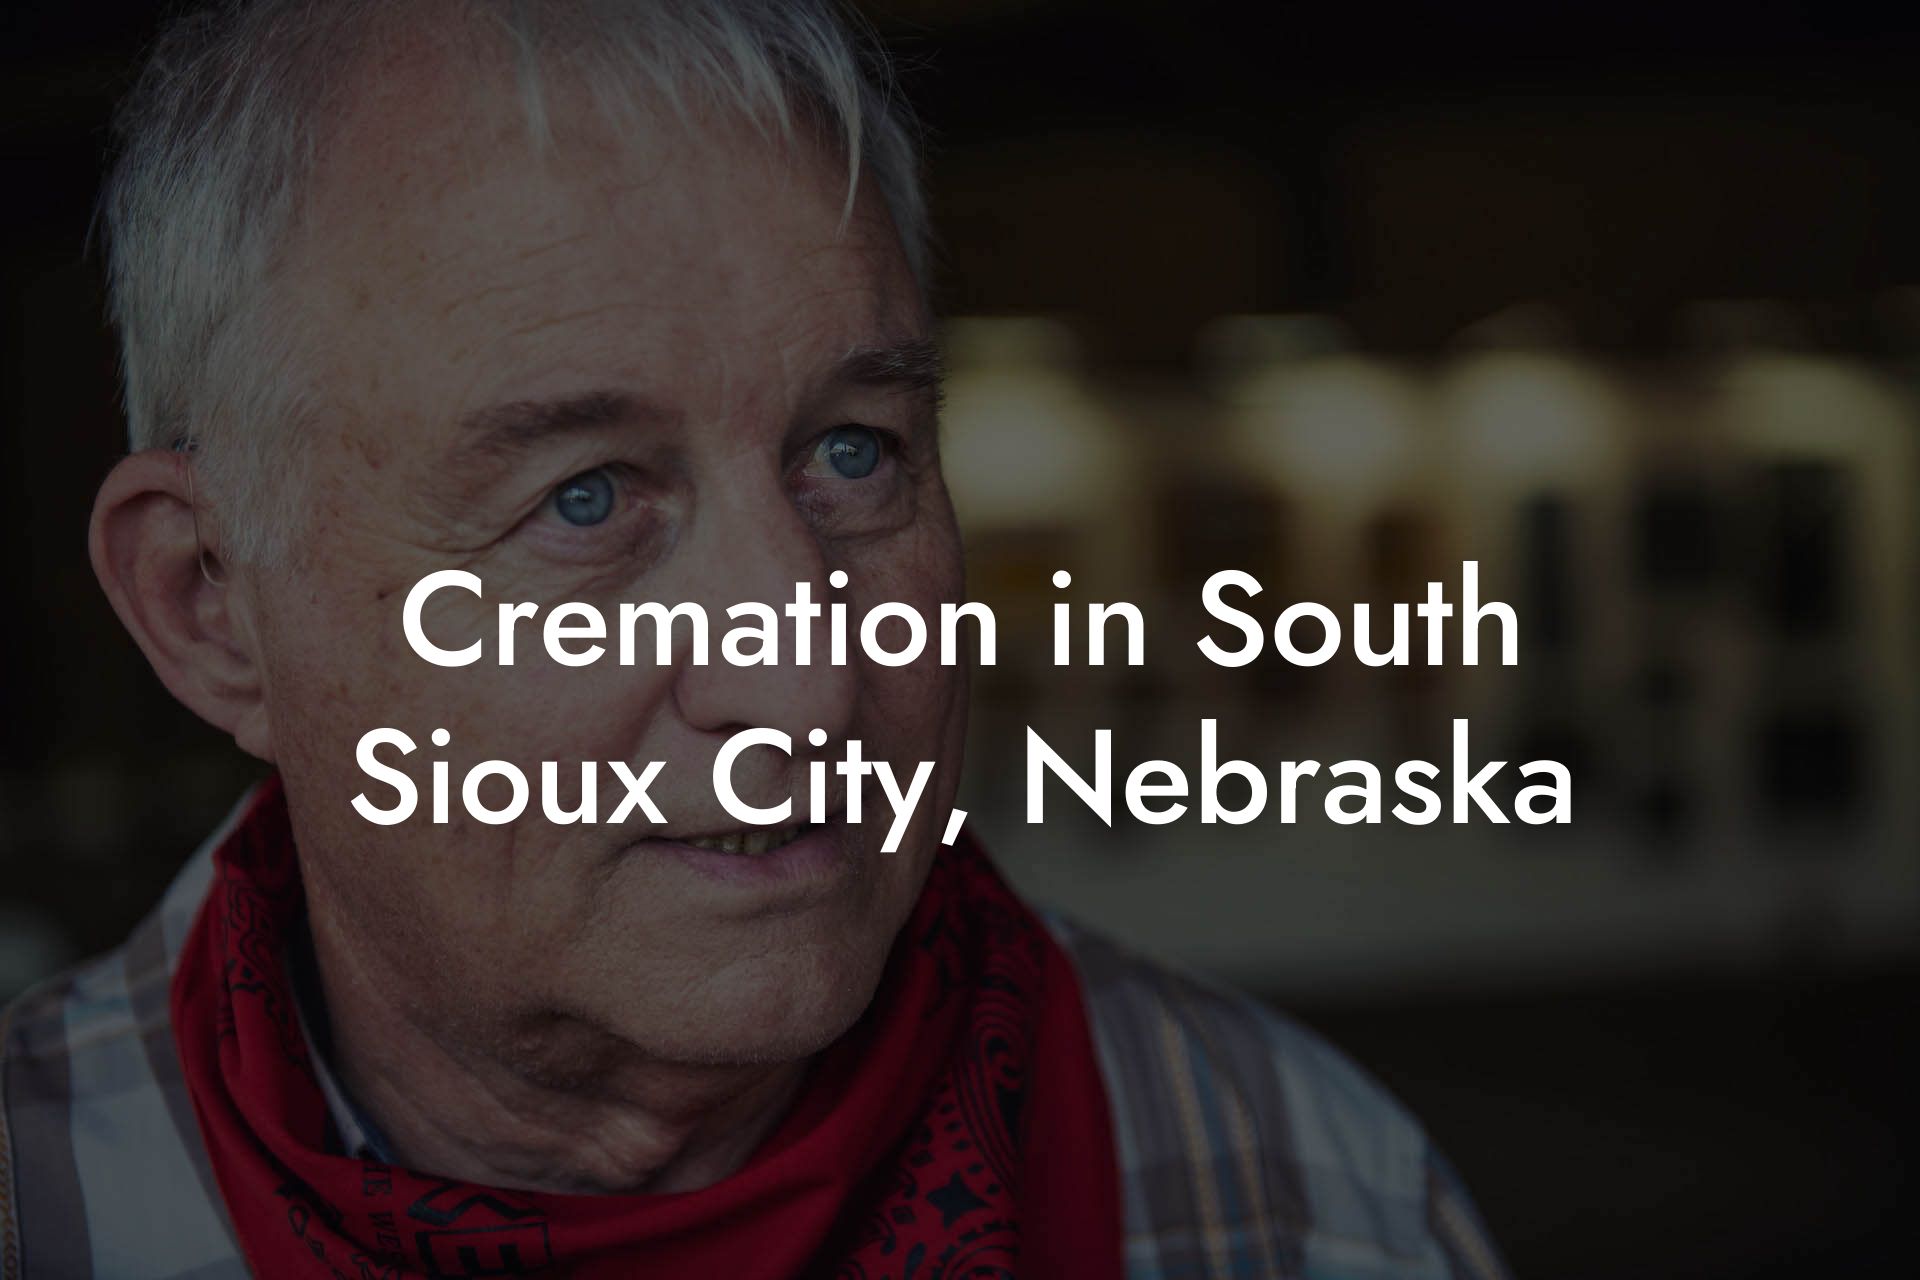 Cremation in South Sioux City, Nebraska